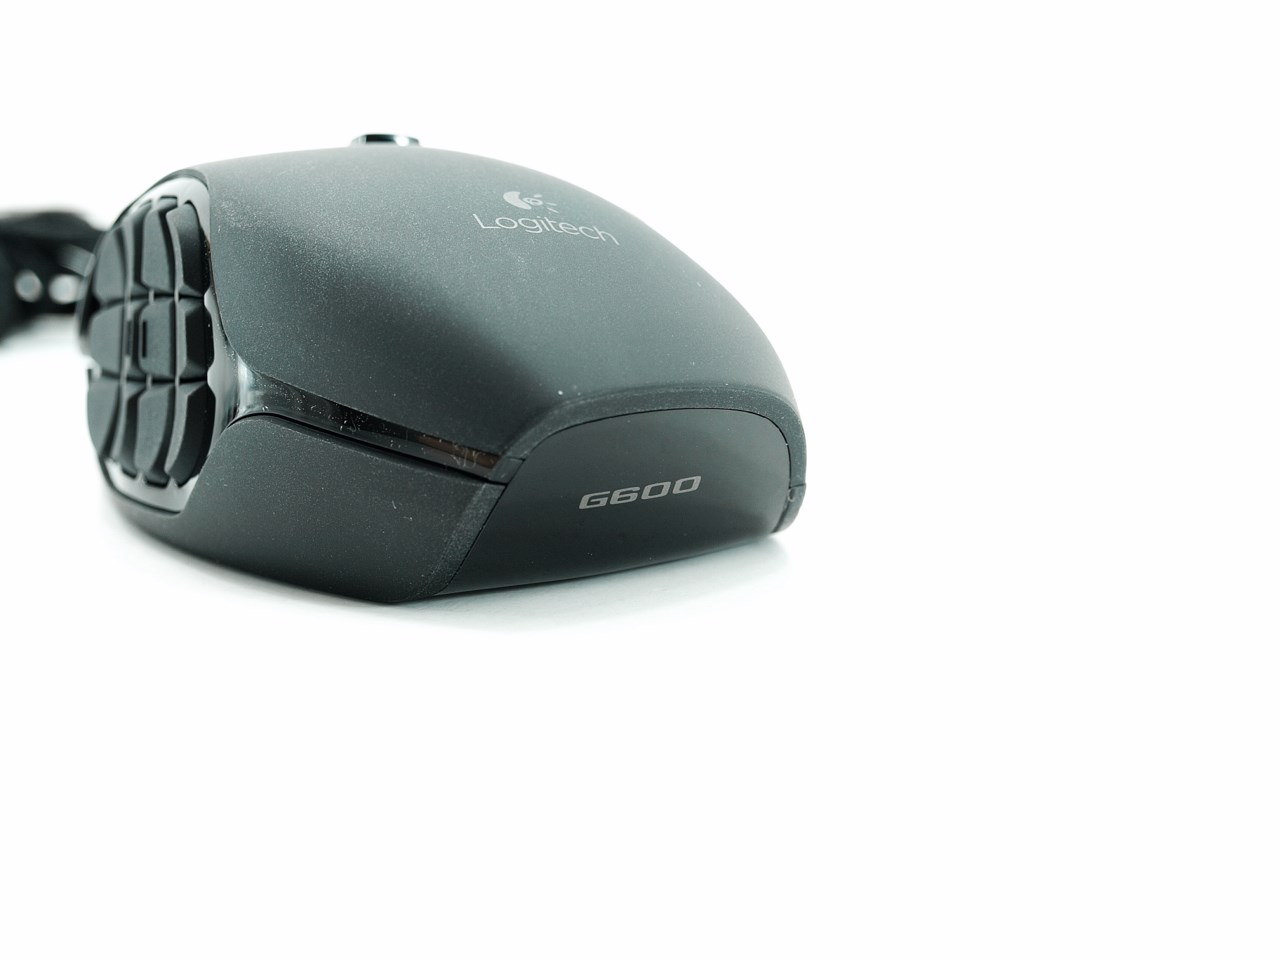 Logitech G600 MMO Gaming Mouse Review – Techgage